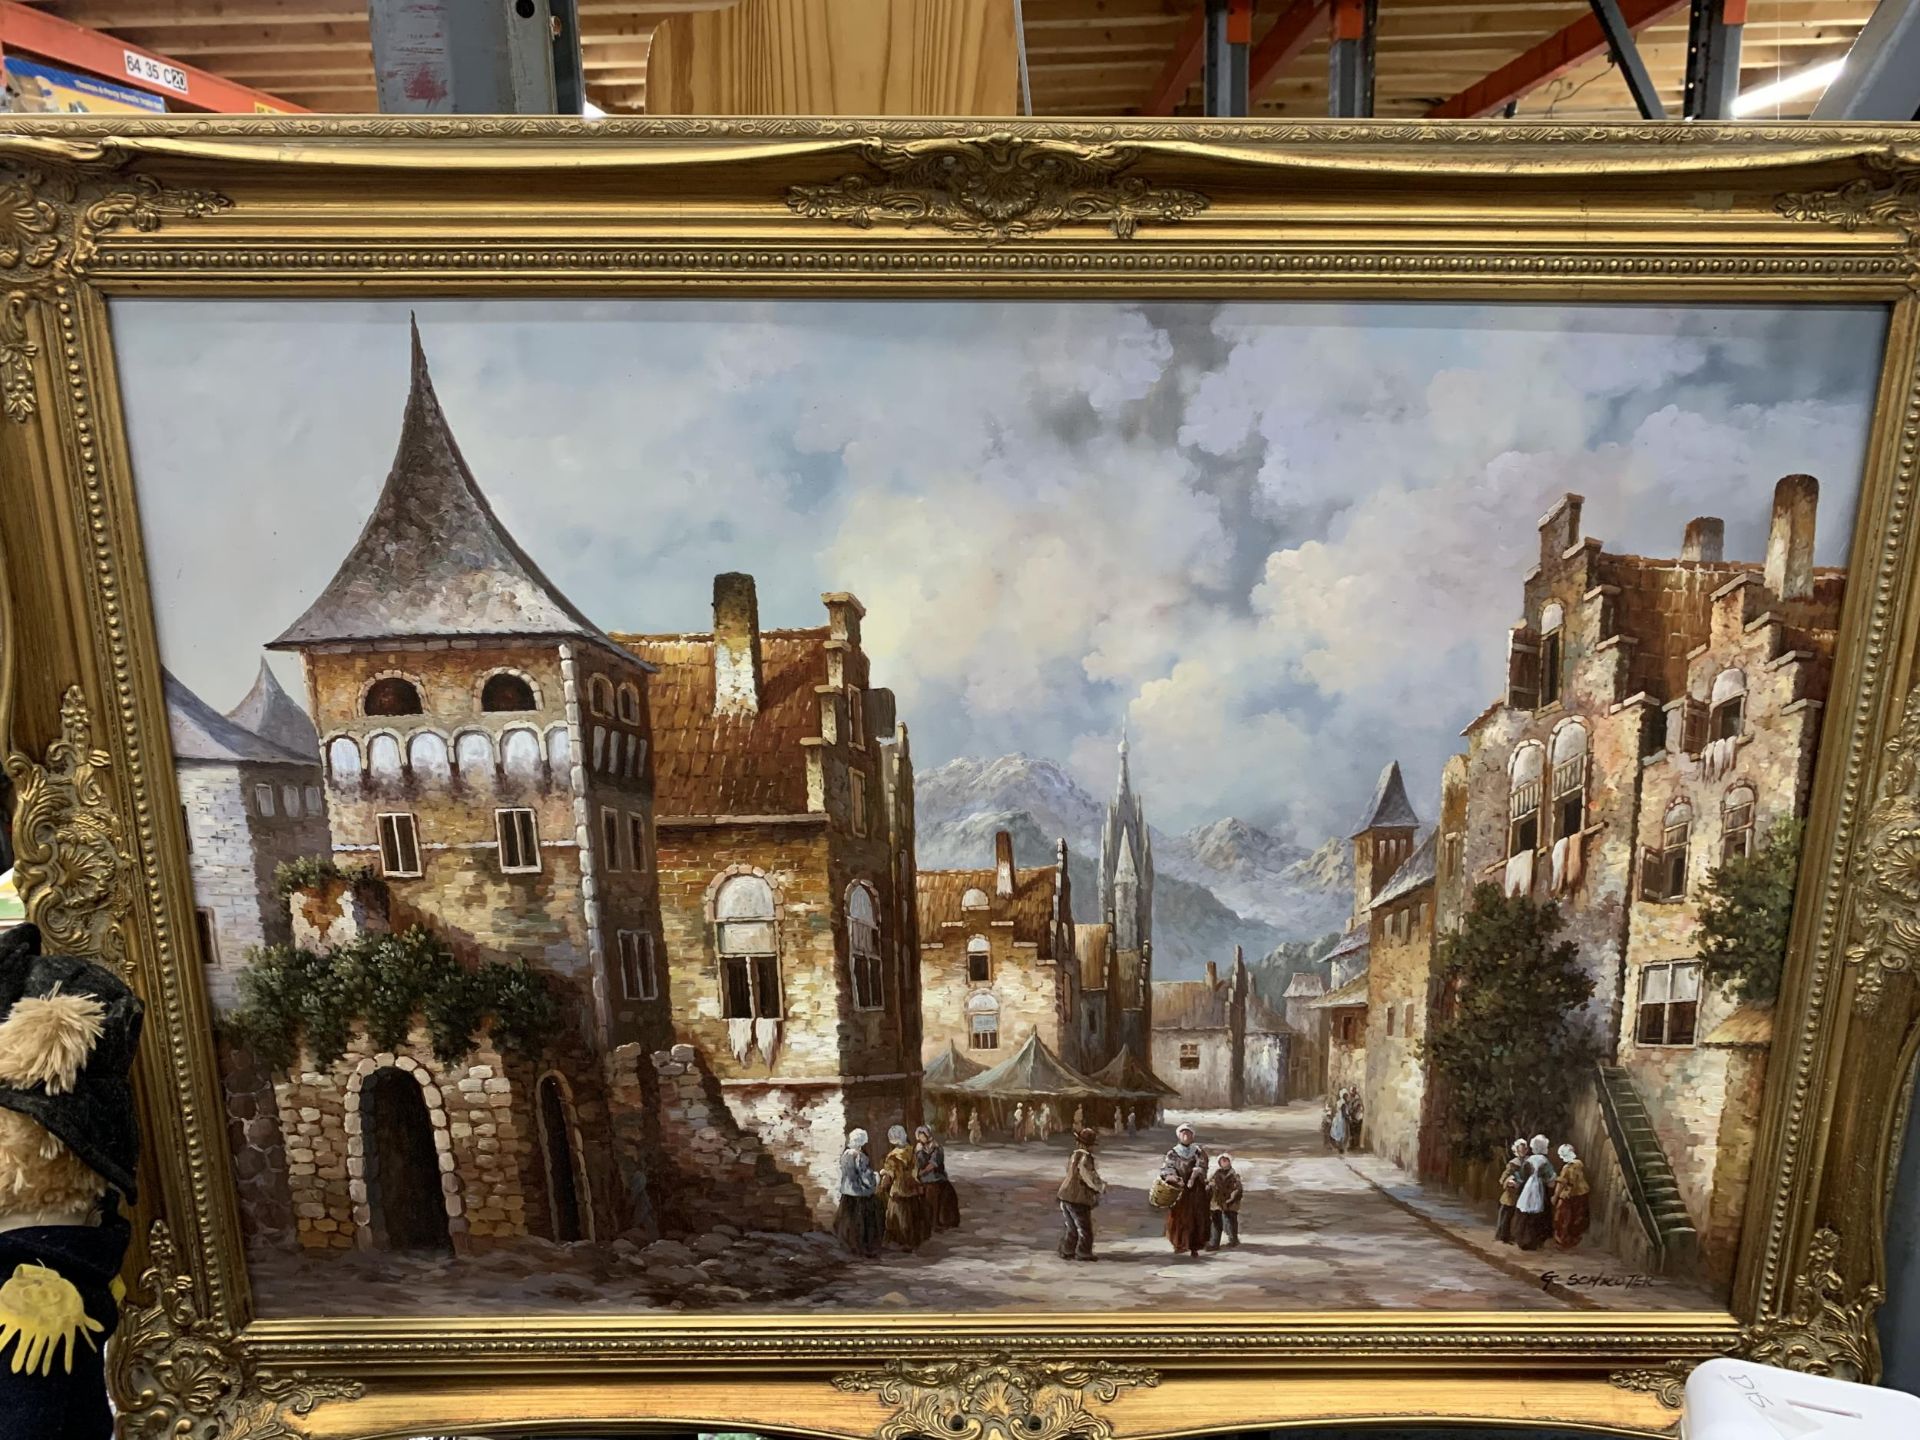 A LARGE OIL ON CANVAS OF A VINTAGE CONTINENTAL STREET SCENE (POSSIBLY BELGIUM) BY DUTCH